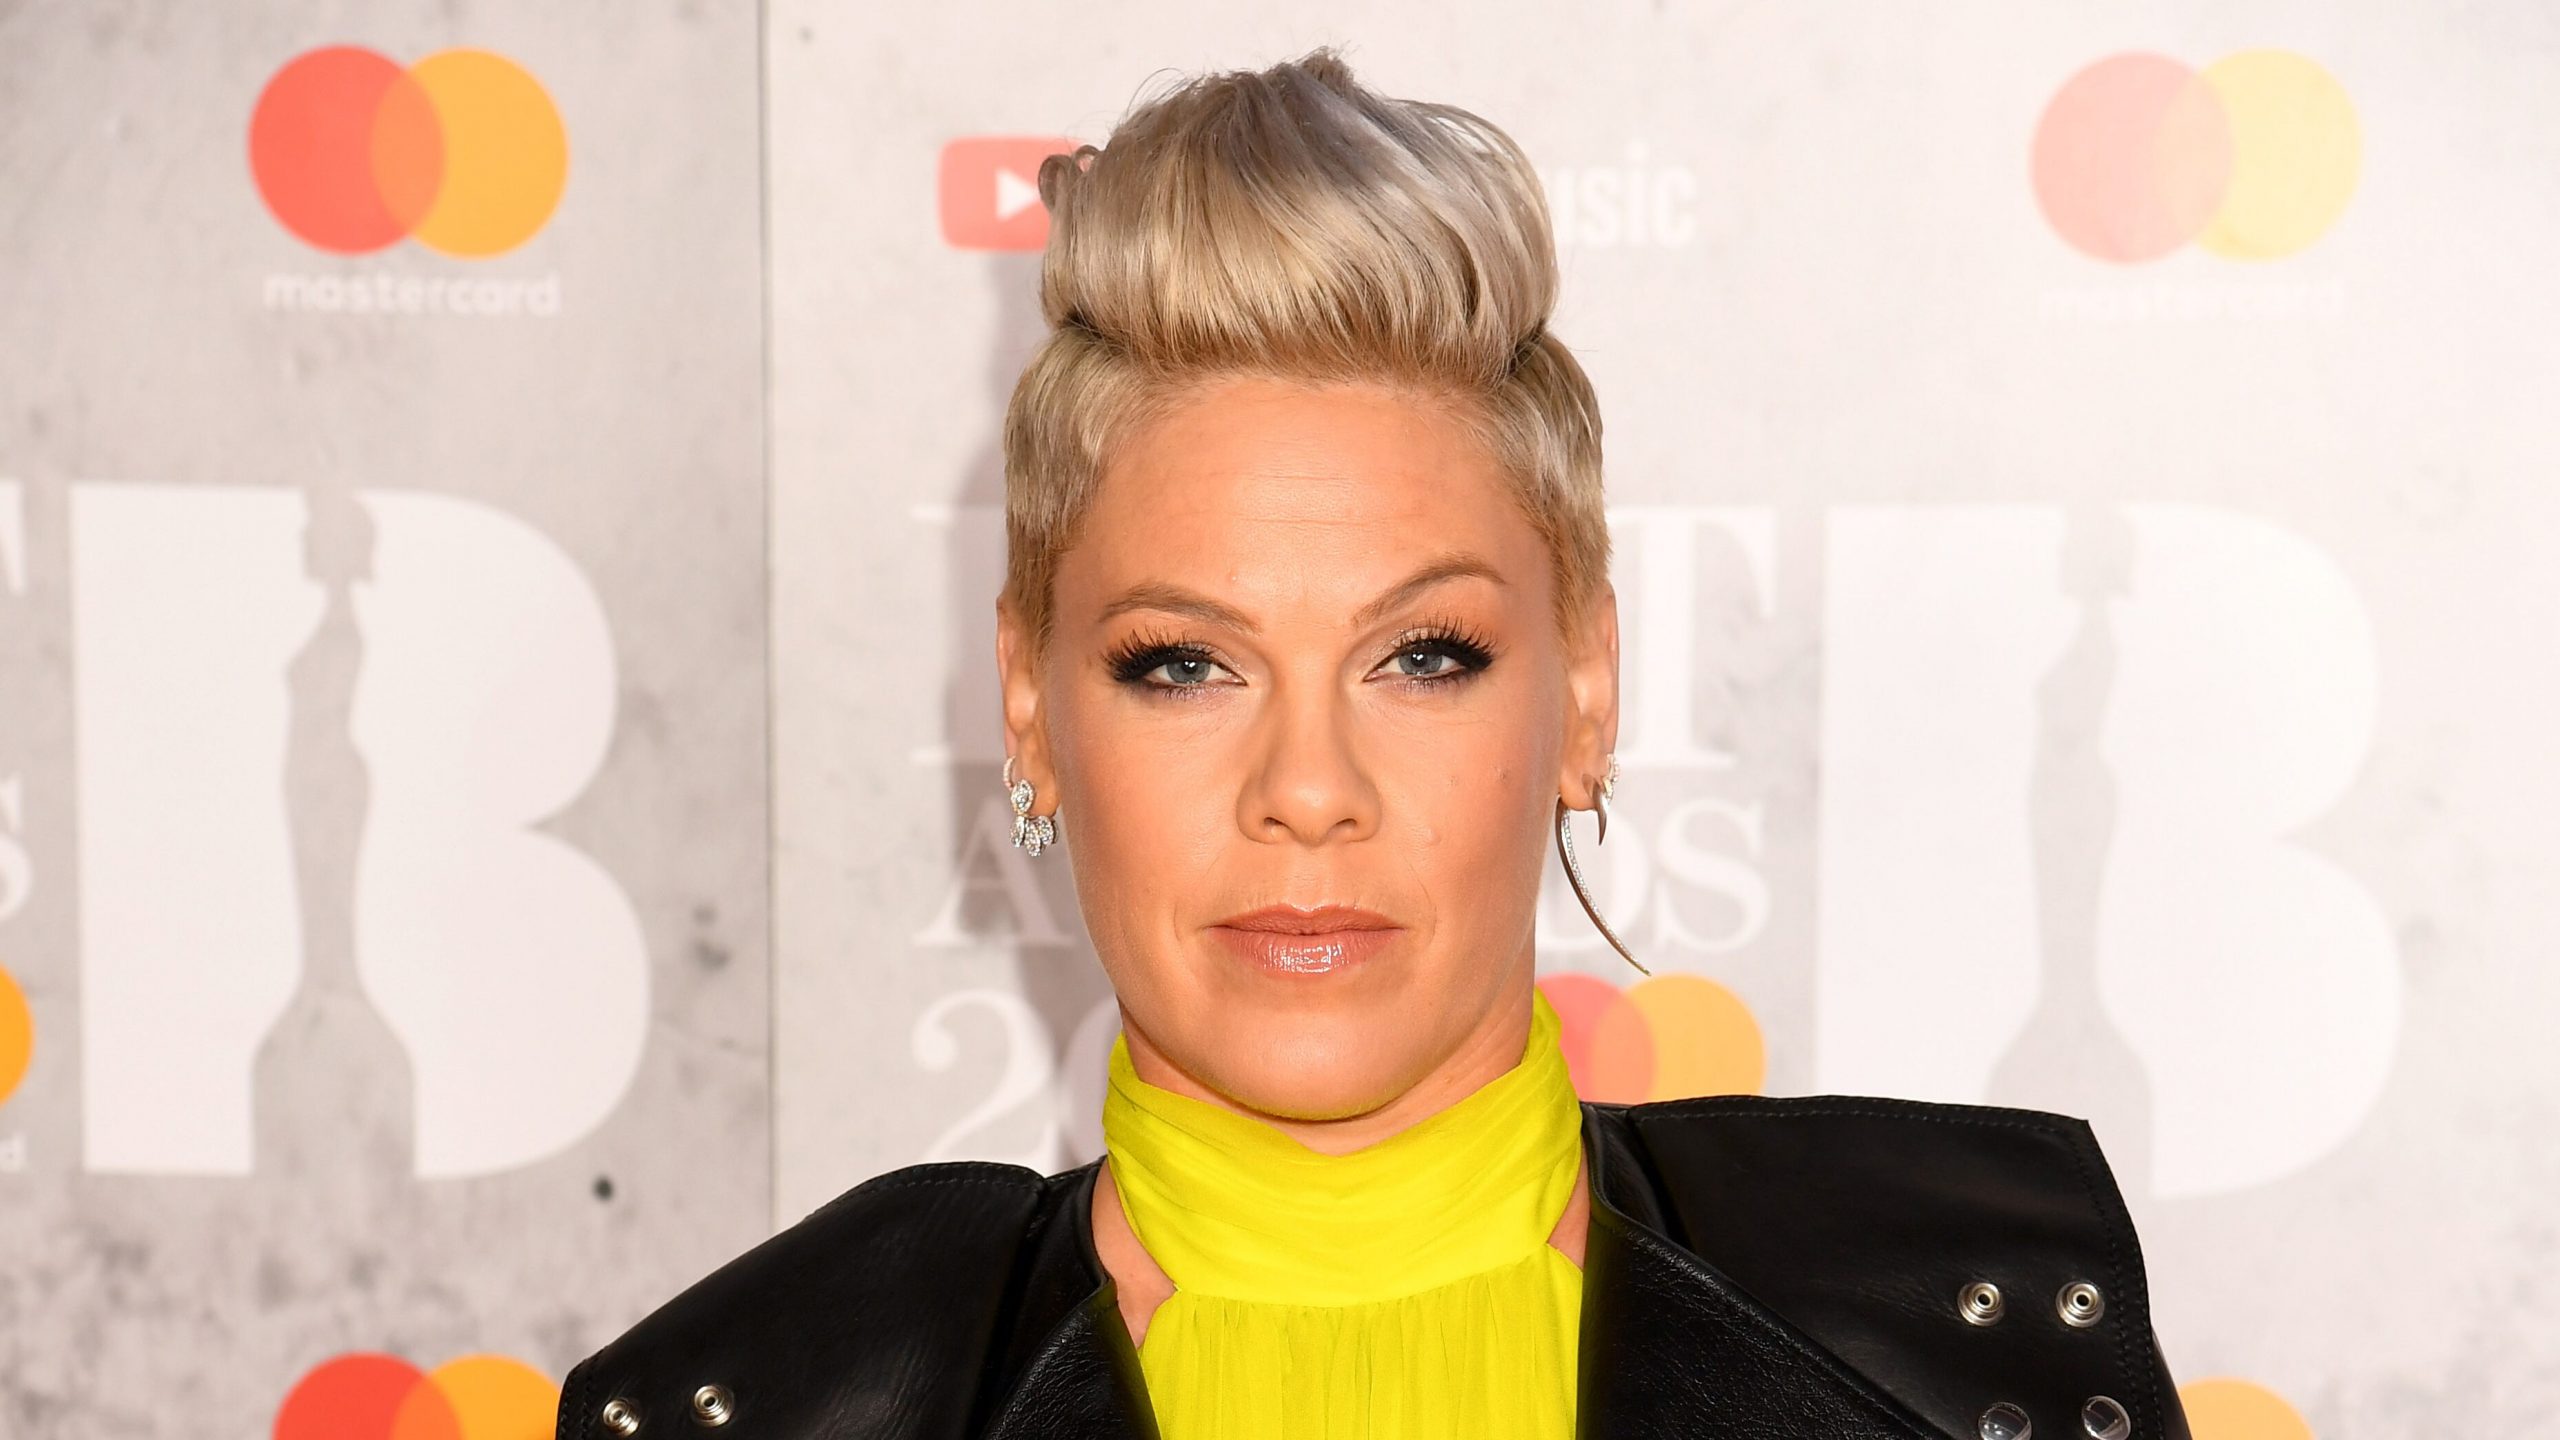 Pink reveals she and son, 3, tested positive for coronavirus: ‘This illness is serious and real’